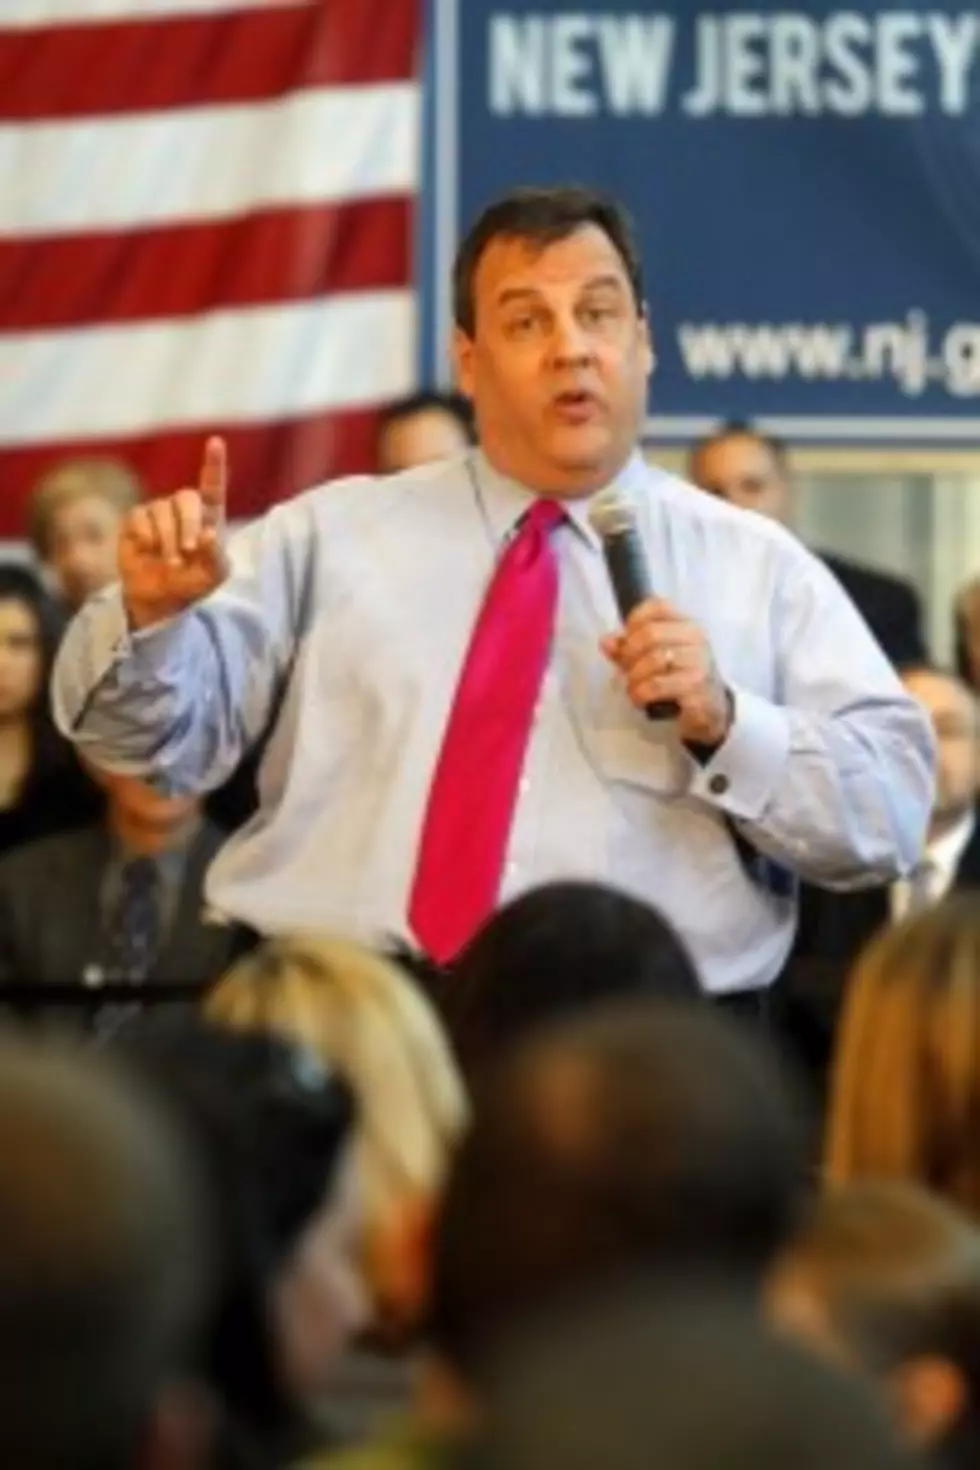 Late Show [3/13] Was the Governor Lying About Bridgegate? [POLL]